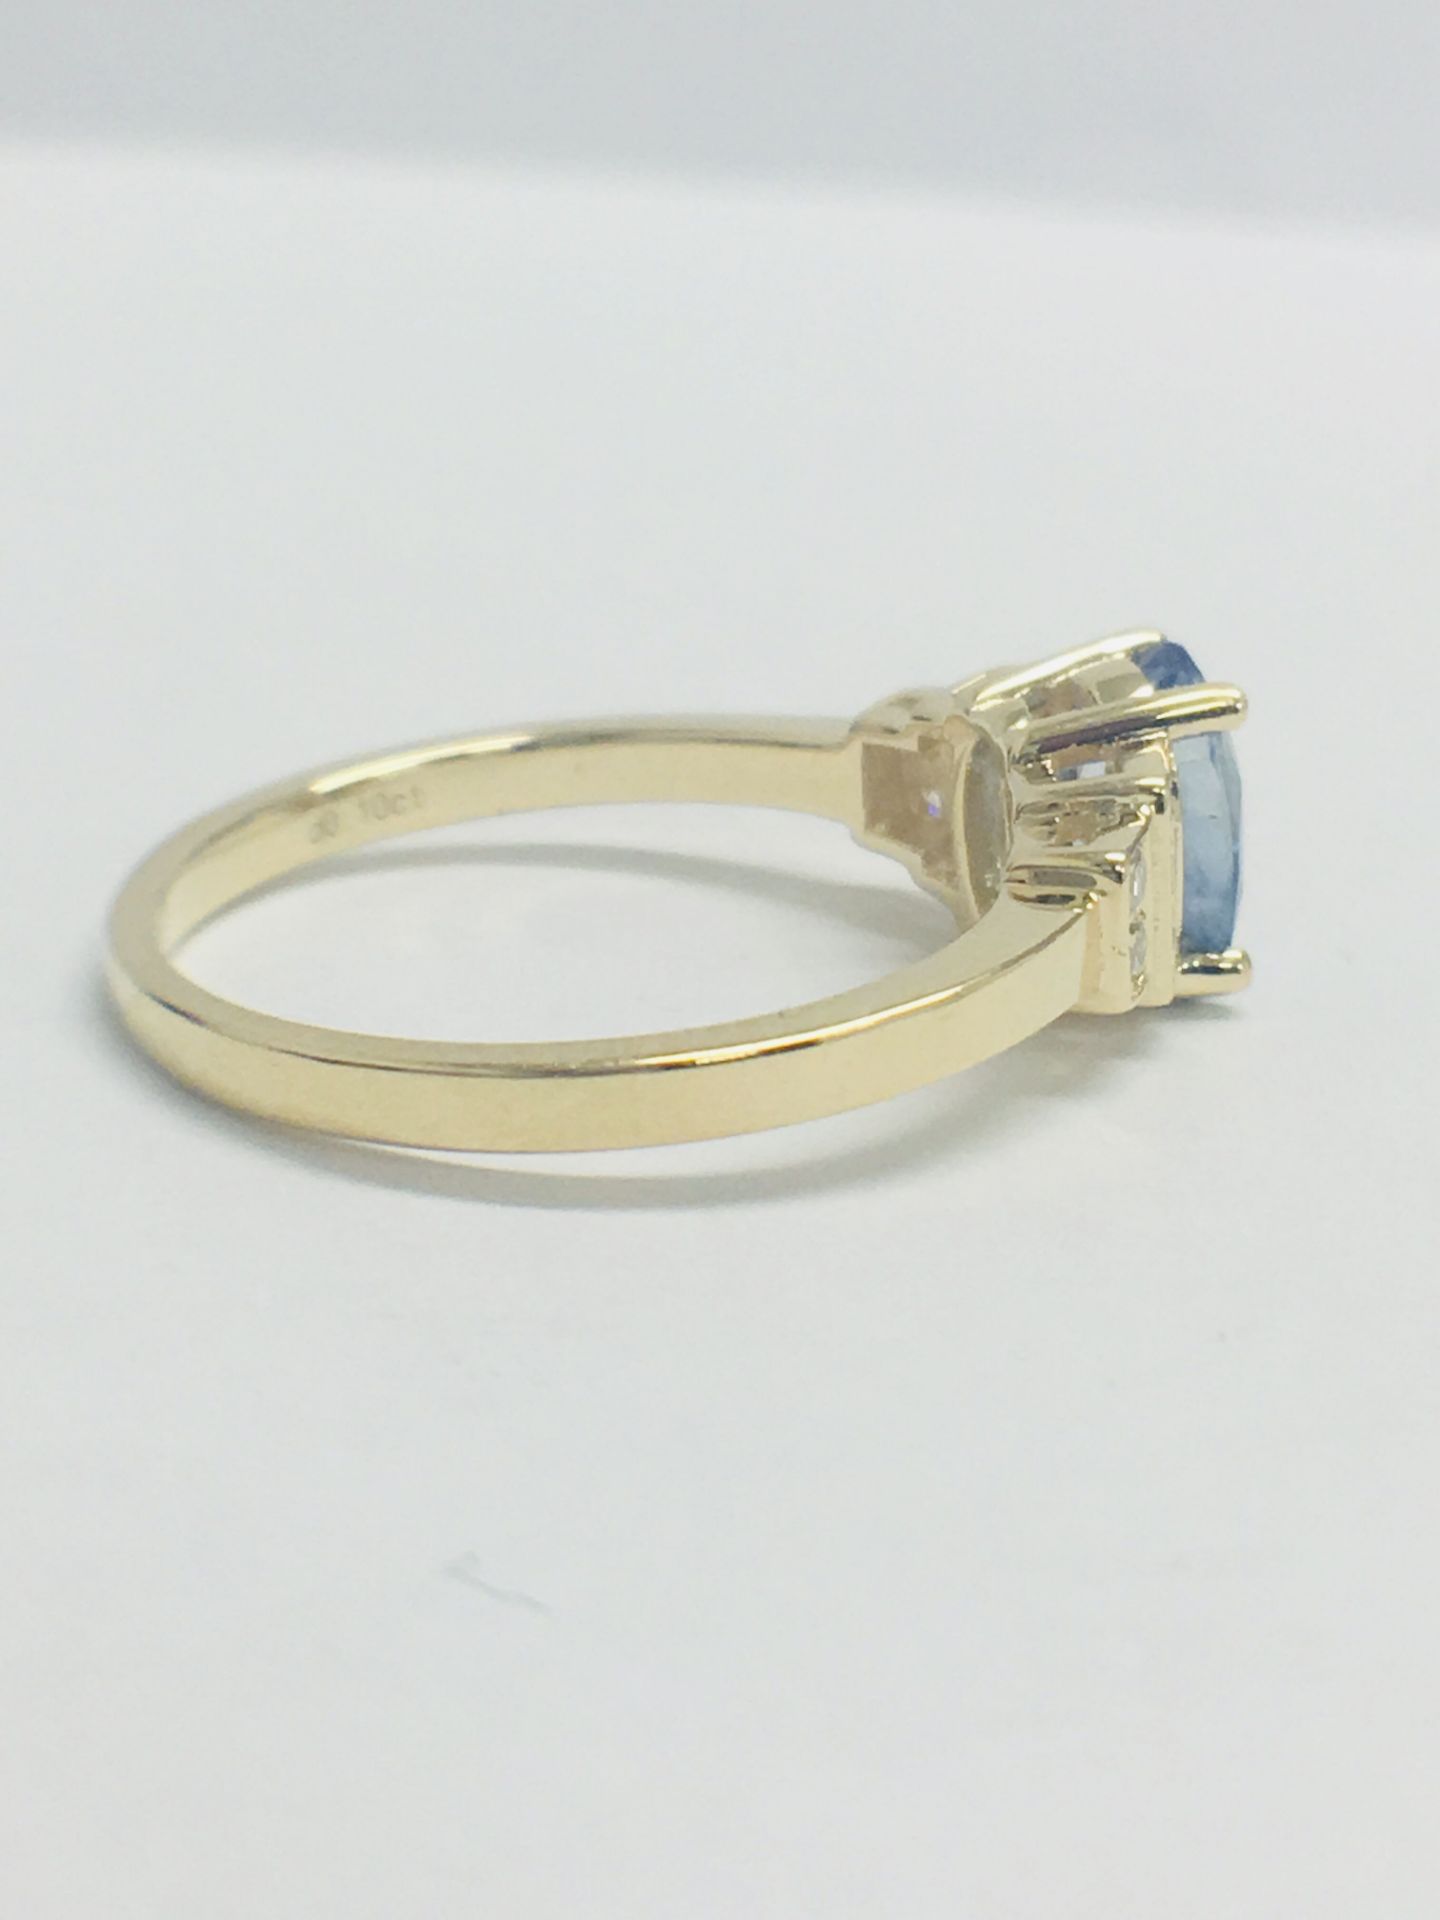 14ct Yellow Gold Sapphire and Diamond Ring. - Image 6 of 10